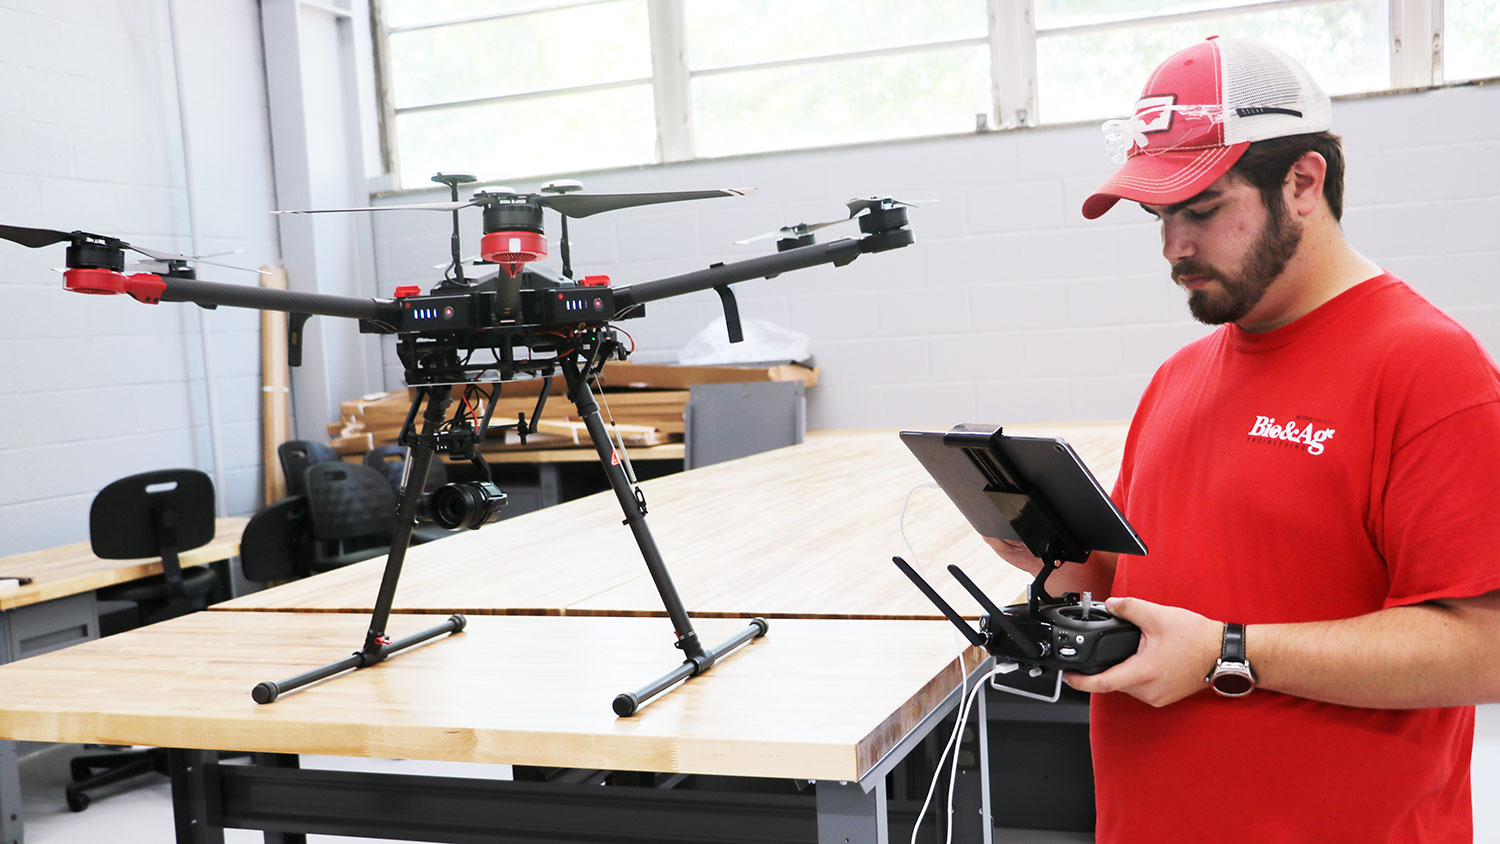 Student working with UAV technology in a lab